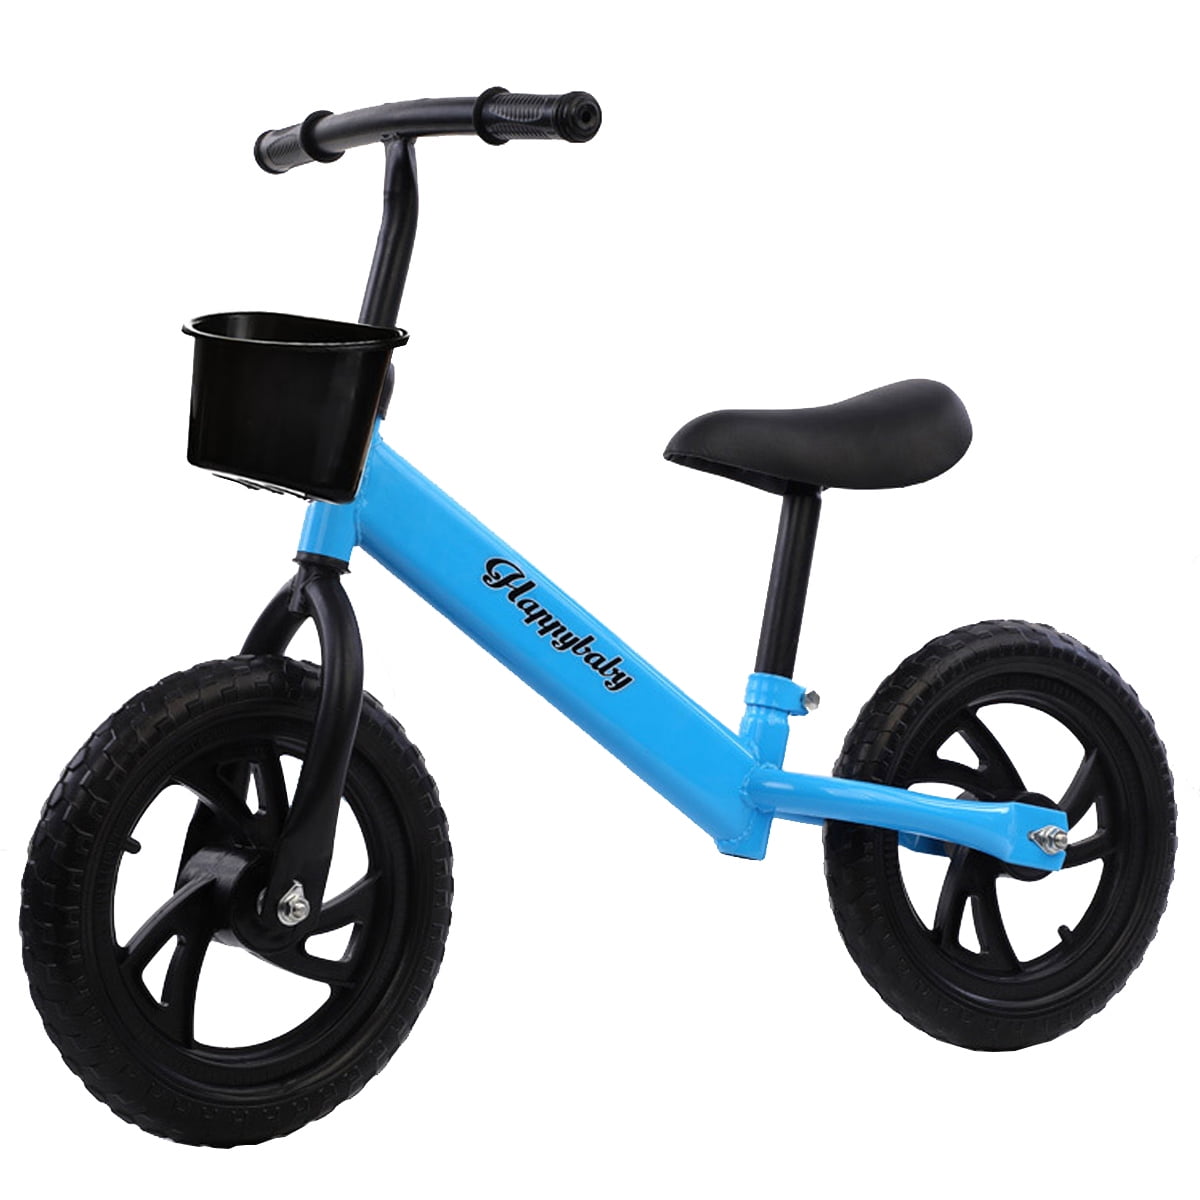 Details about   Kids Balance Bike Walker Childs Training Bicycle Toy Non-Pedal w/Adujstable Seat 